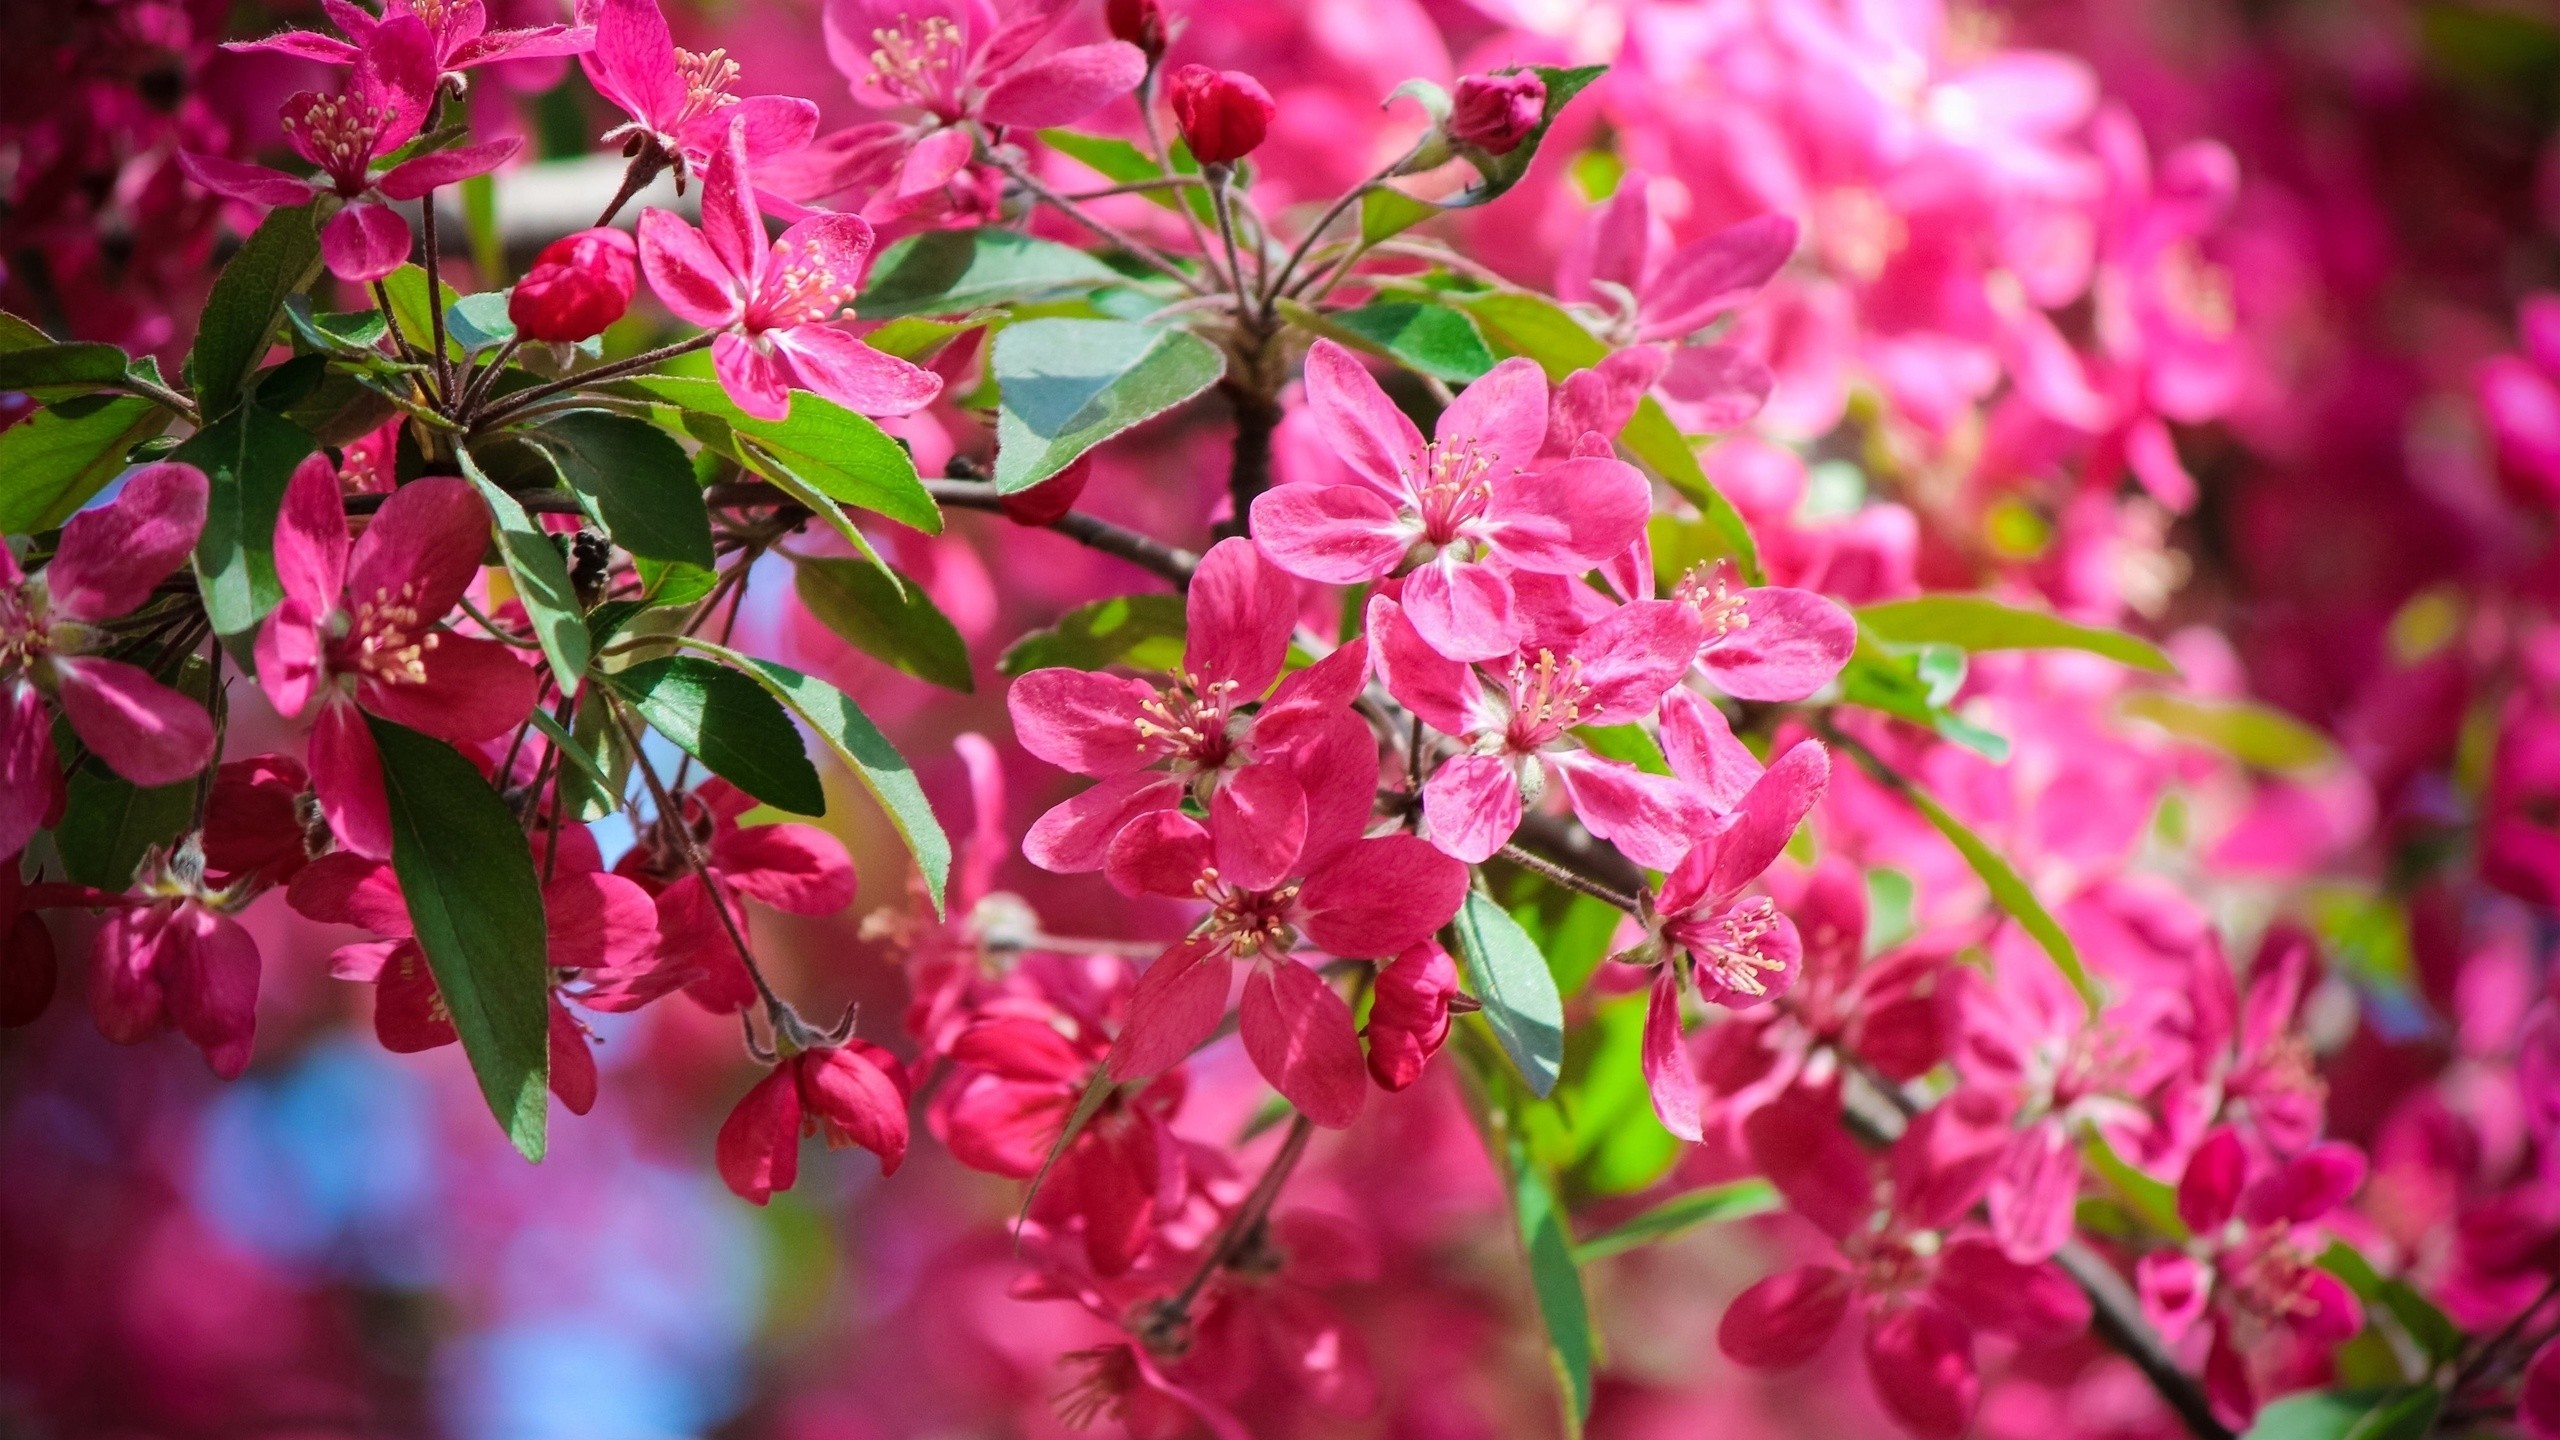 General 2560x1440 nature flowers pink flowers plants